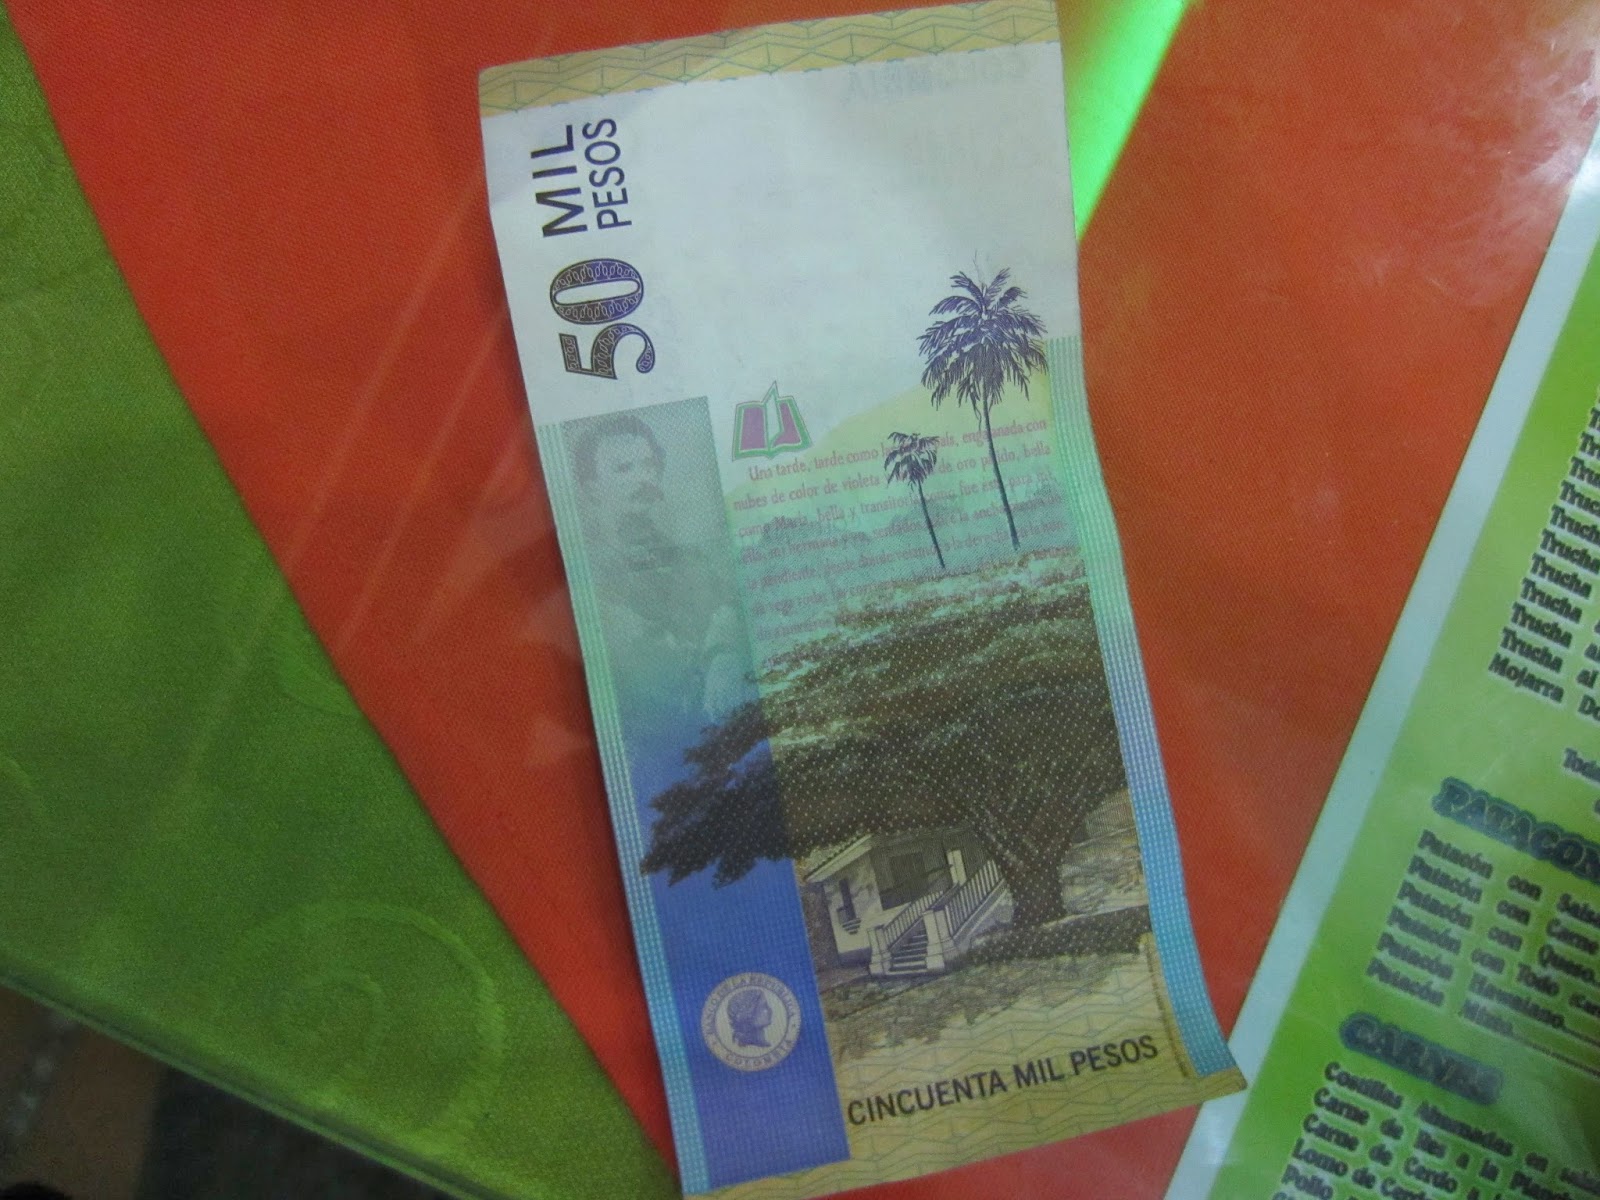 Wax palms are a symbol of Colombia, and are even pictured on the currency.